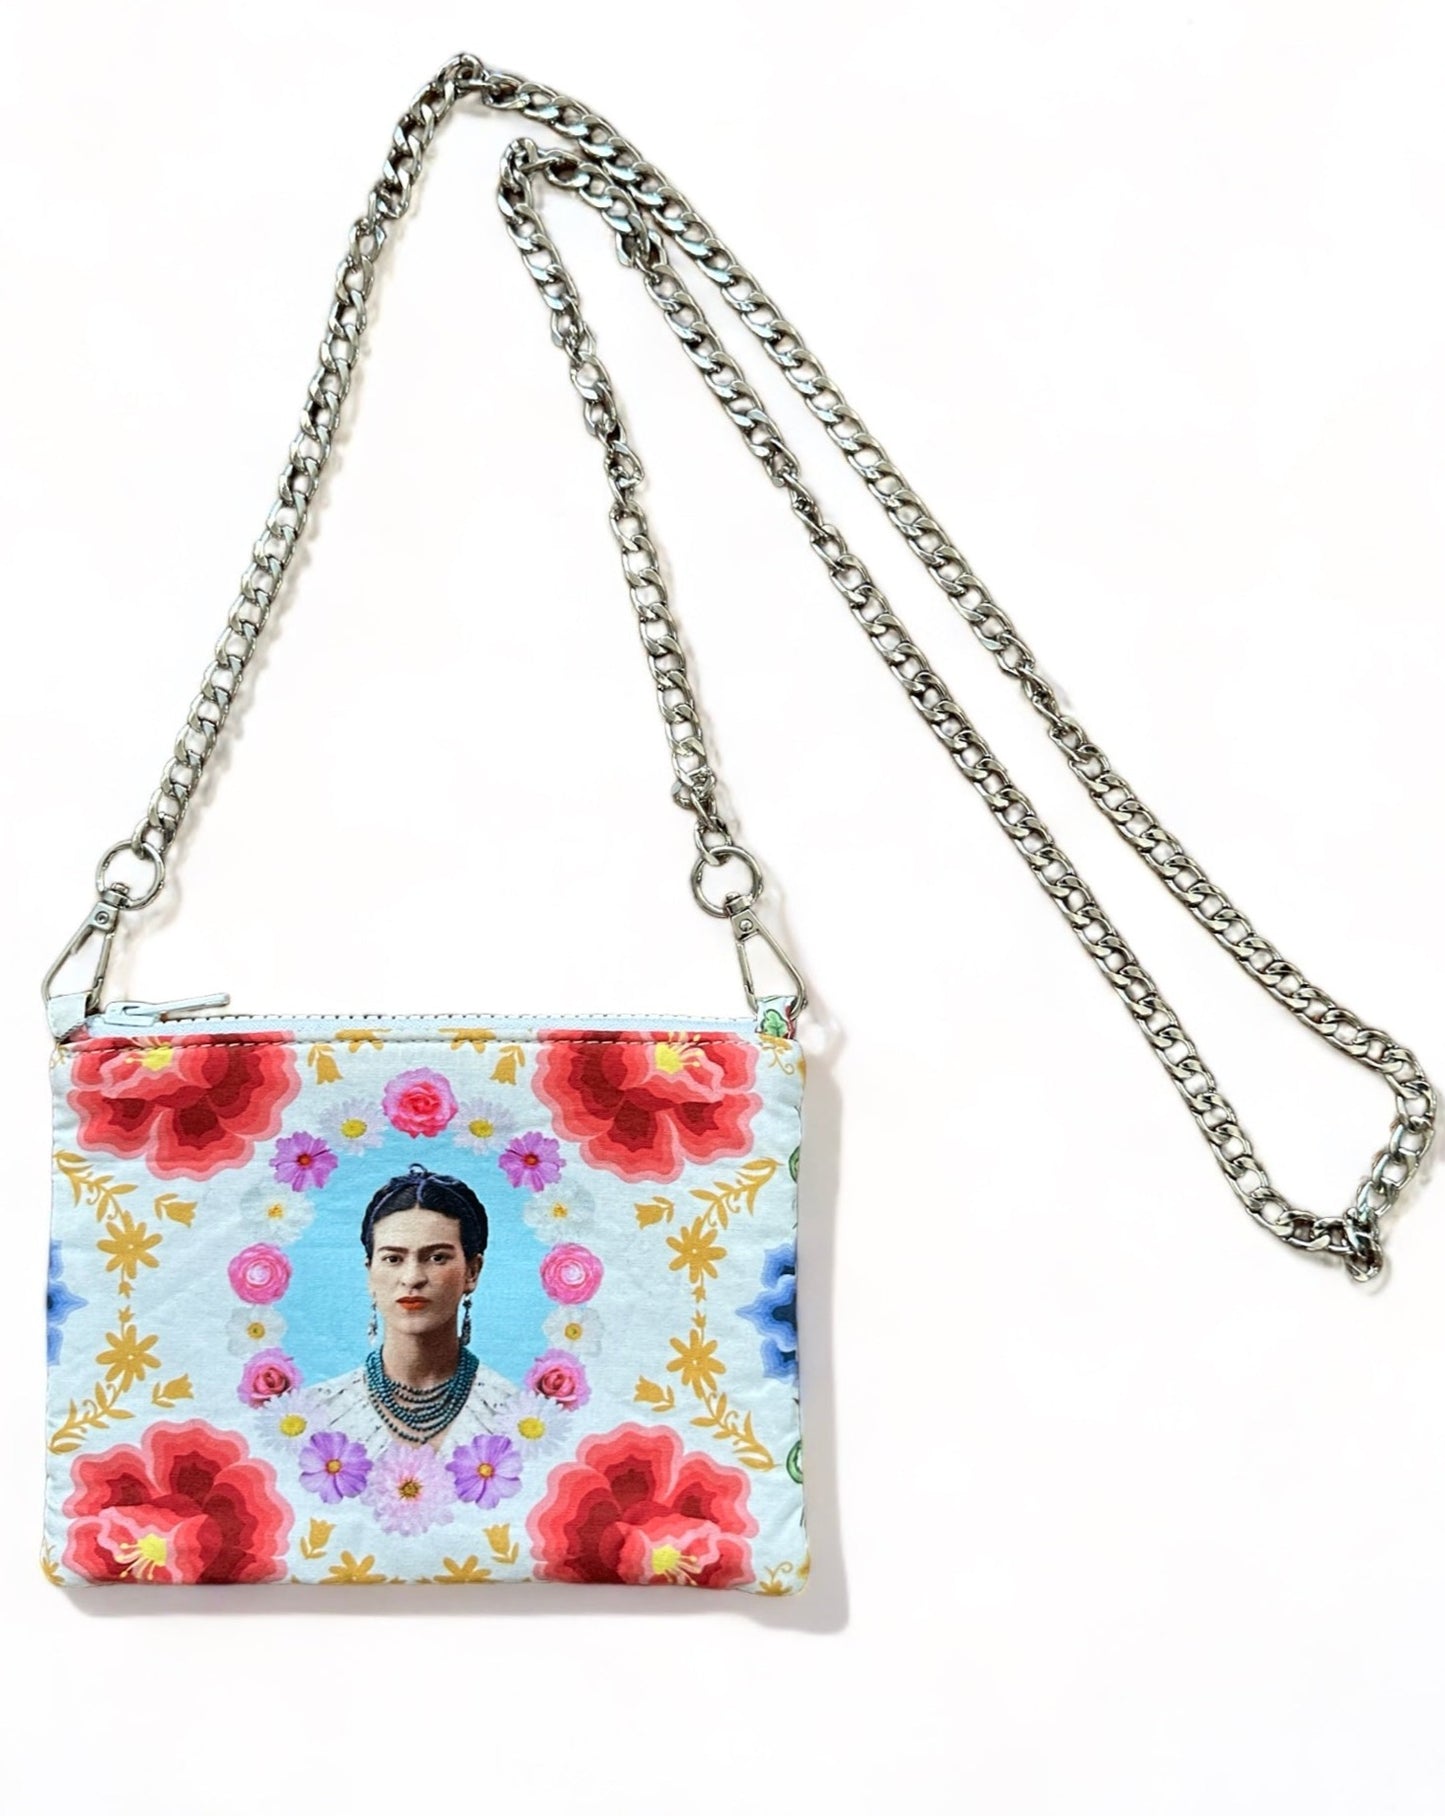 Frida Kahlo pouch with wristlet and chain